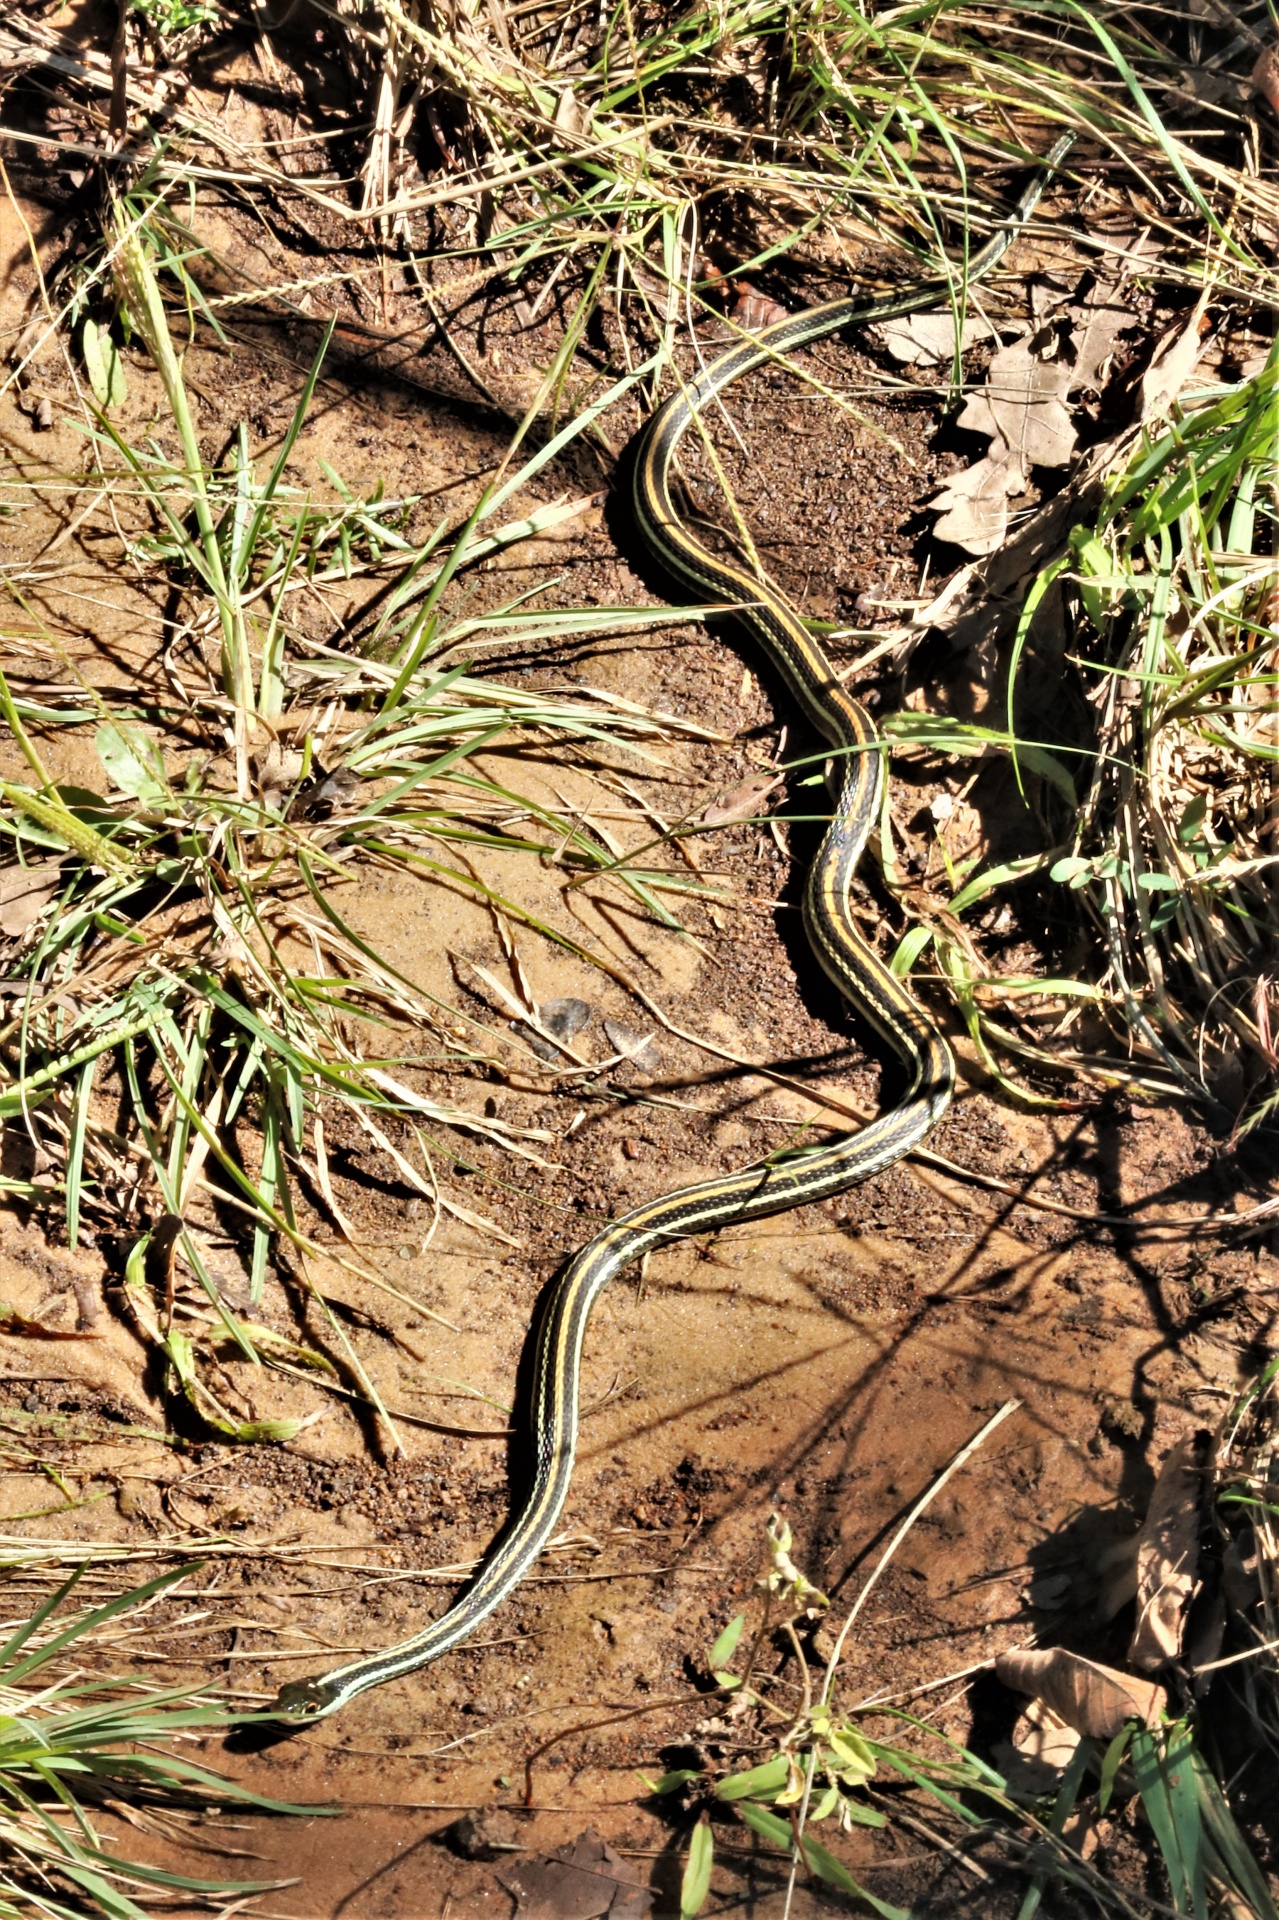 Full length shot of a black and yellow striped garter snake as it slithers through the grass.